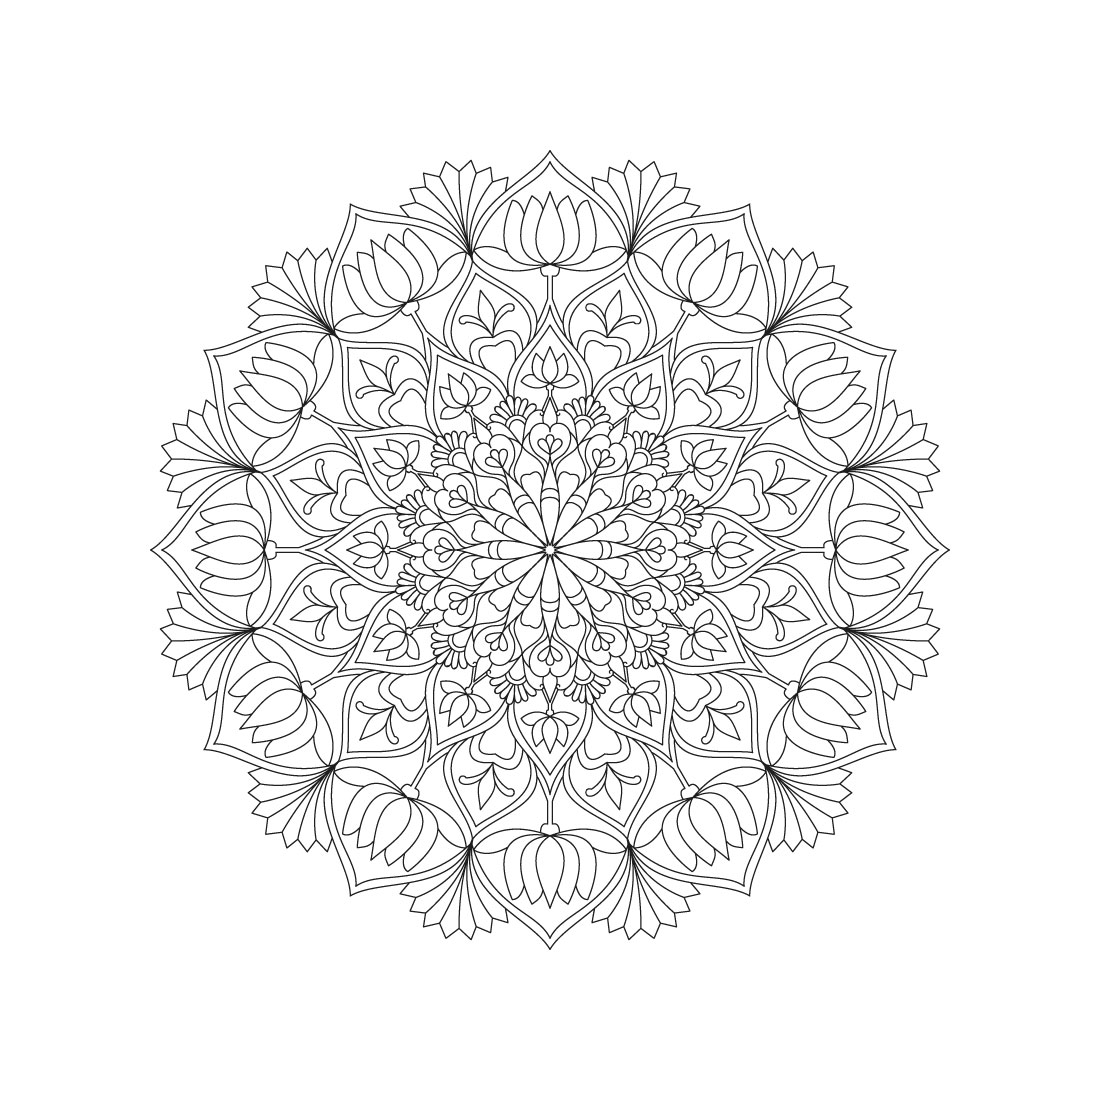 bundle of 10 tranquil gardens mandala coloring book pages 03 367